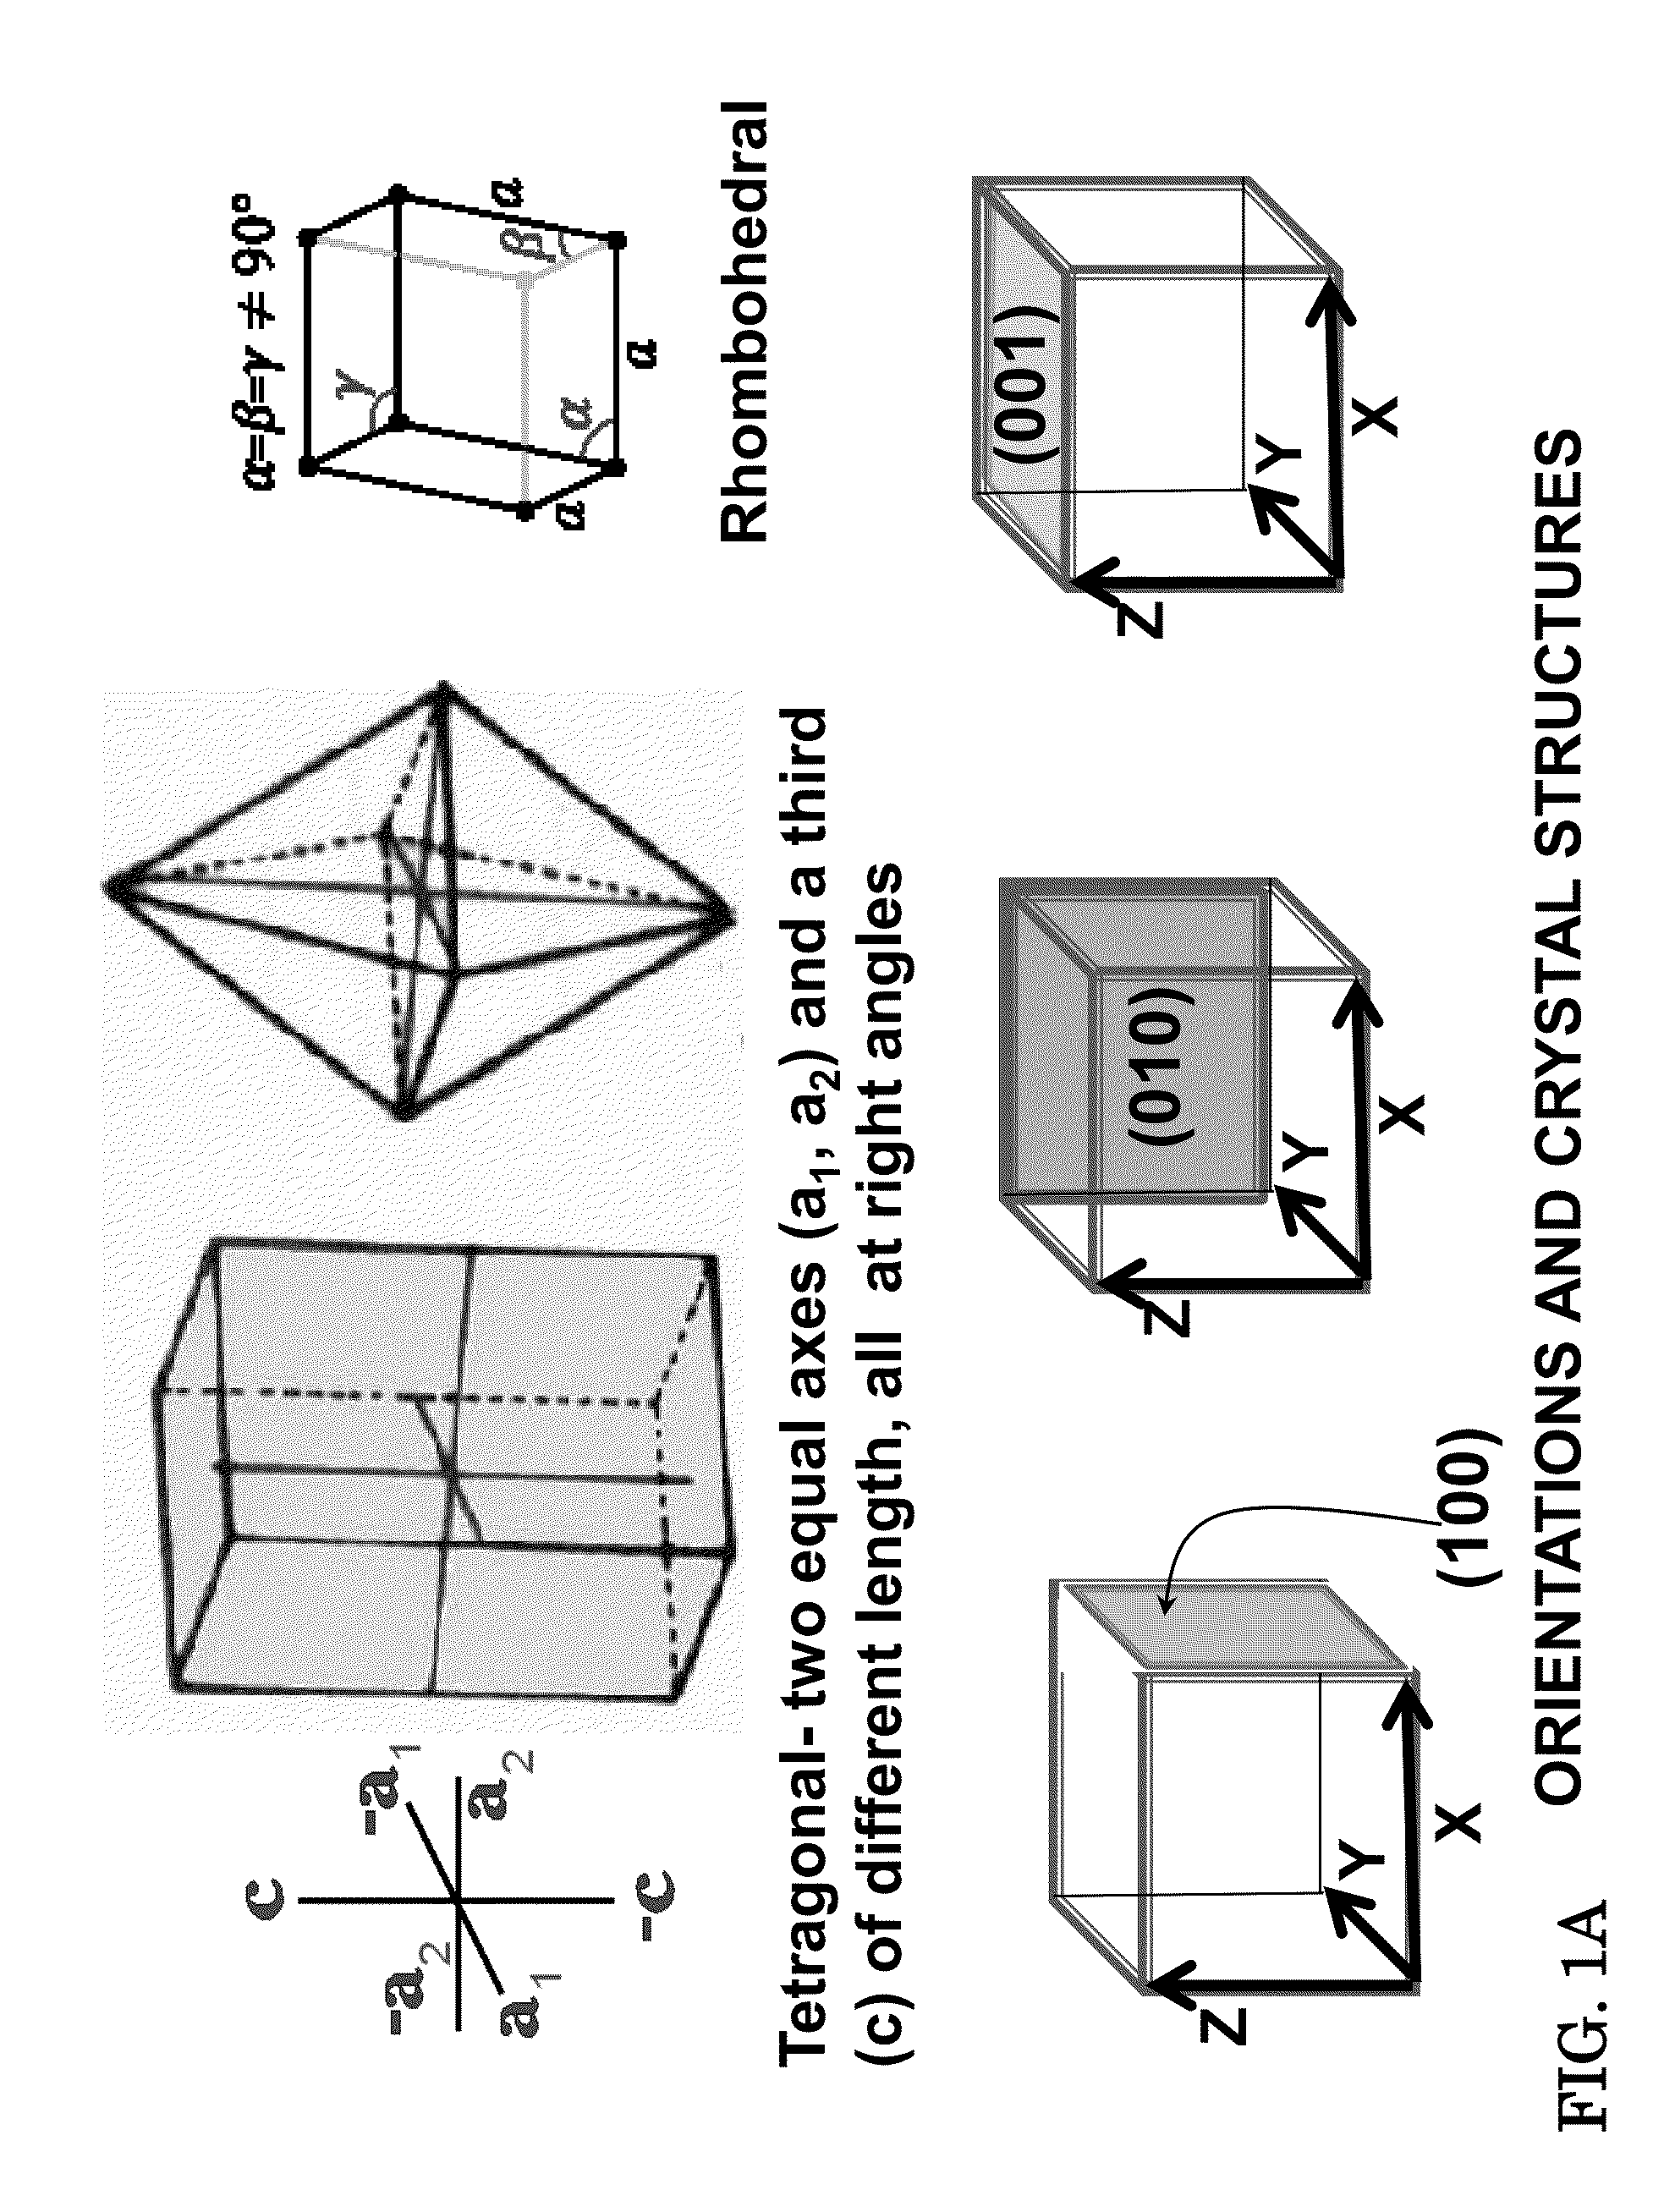 Thermally oxidized seed layers for the production of  textured electrodes and pzt devices and method of making